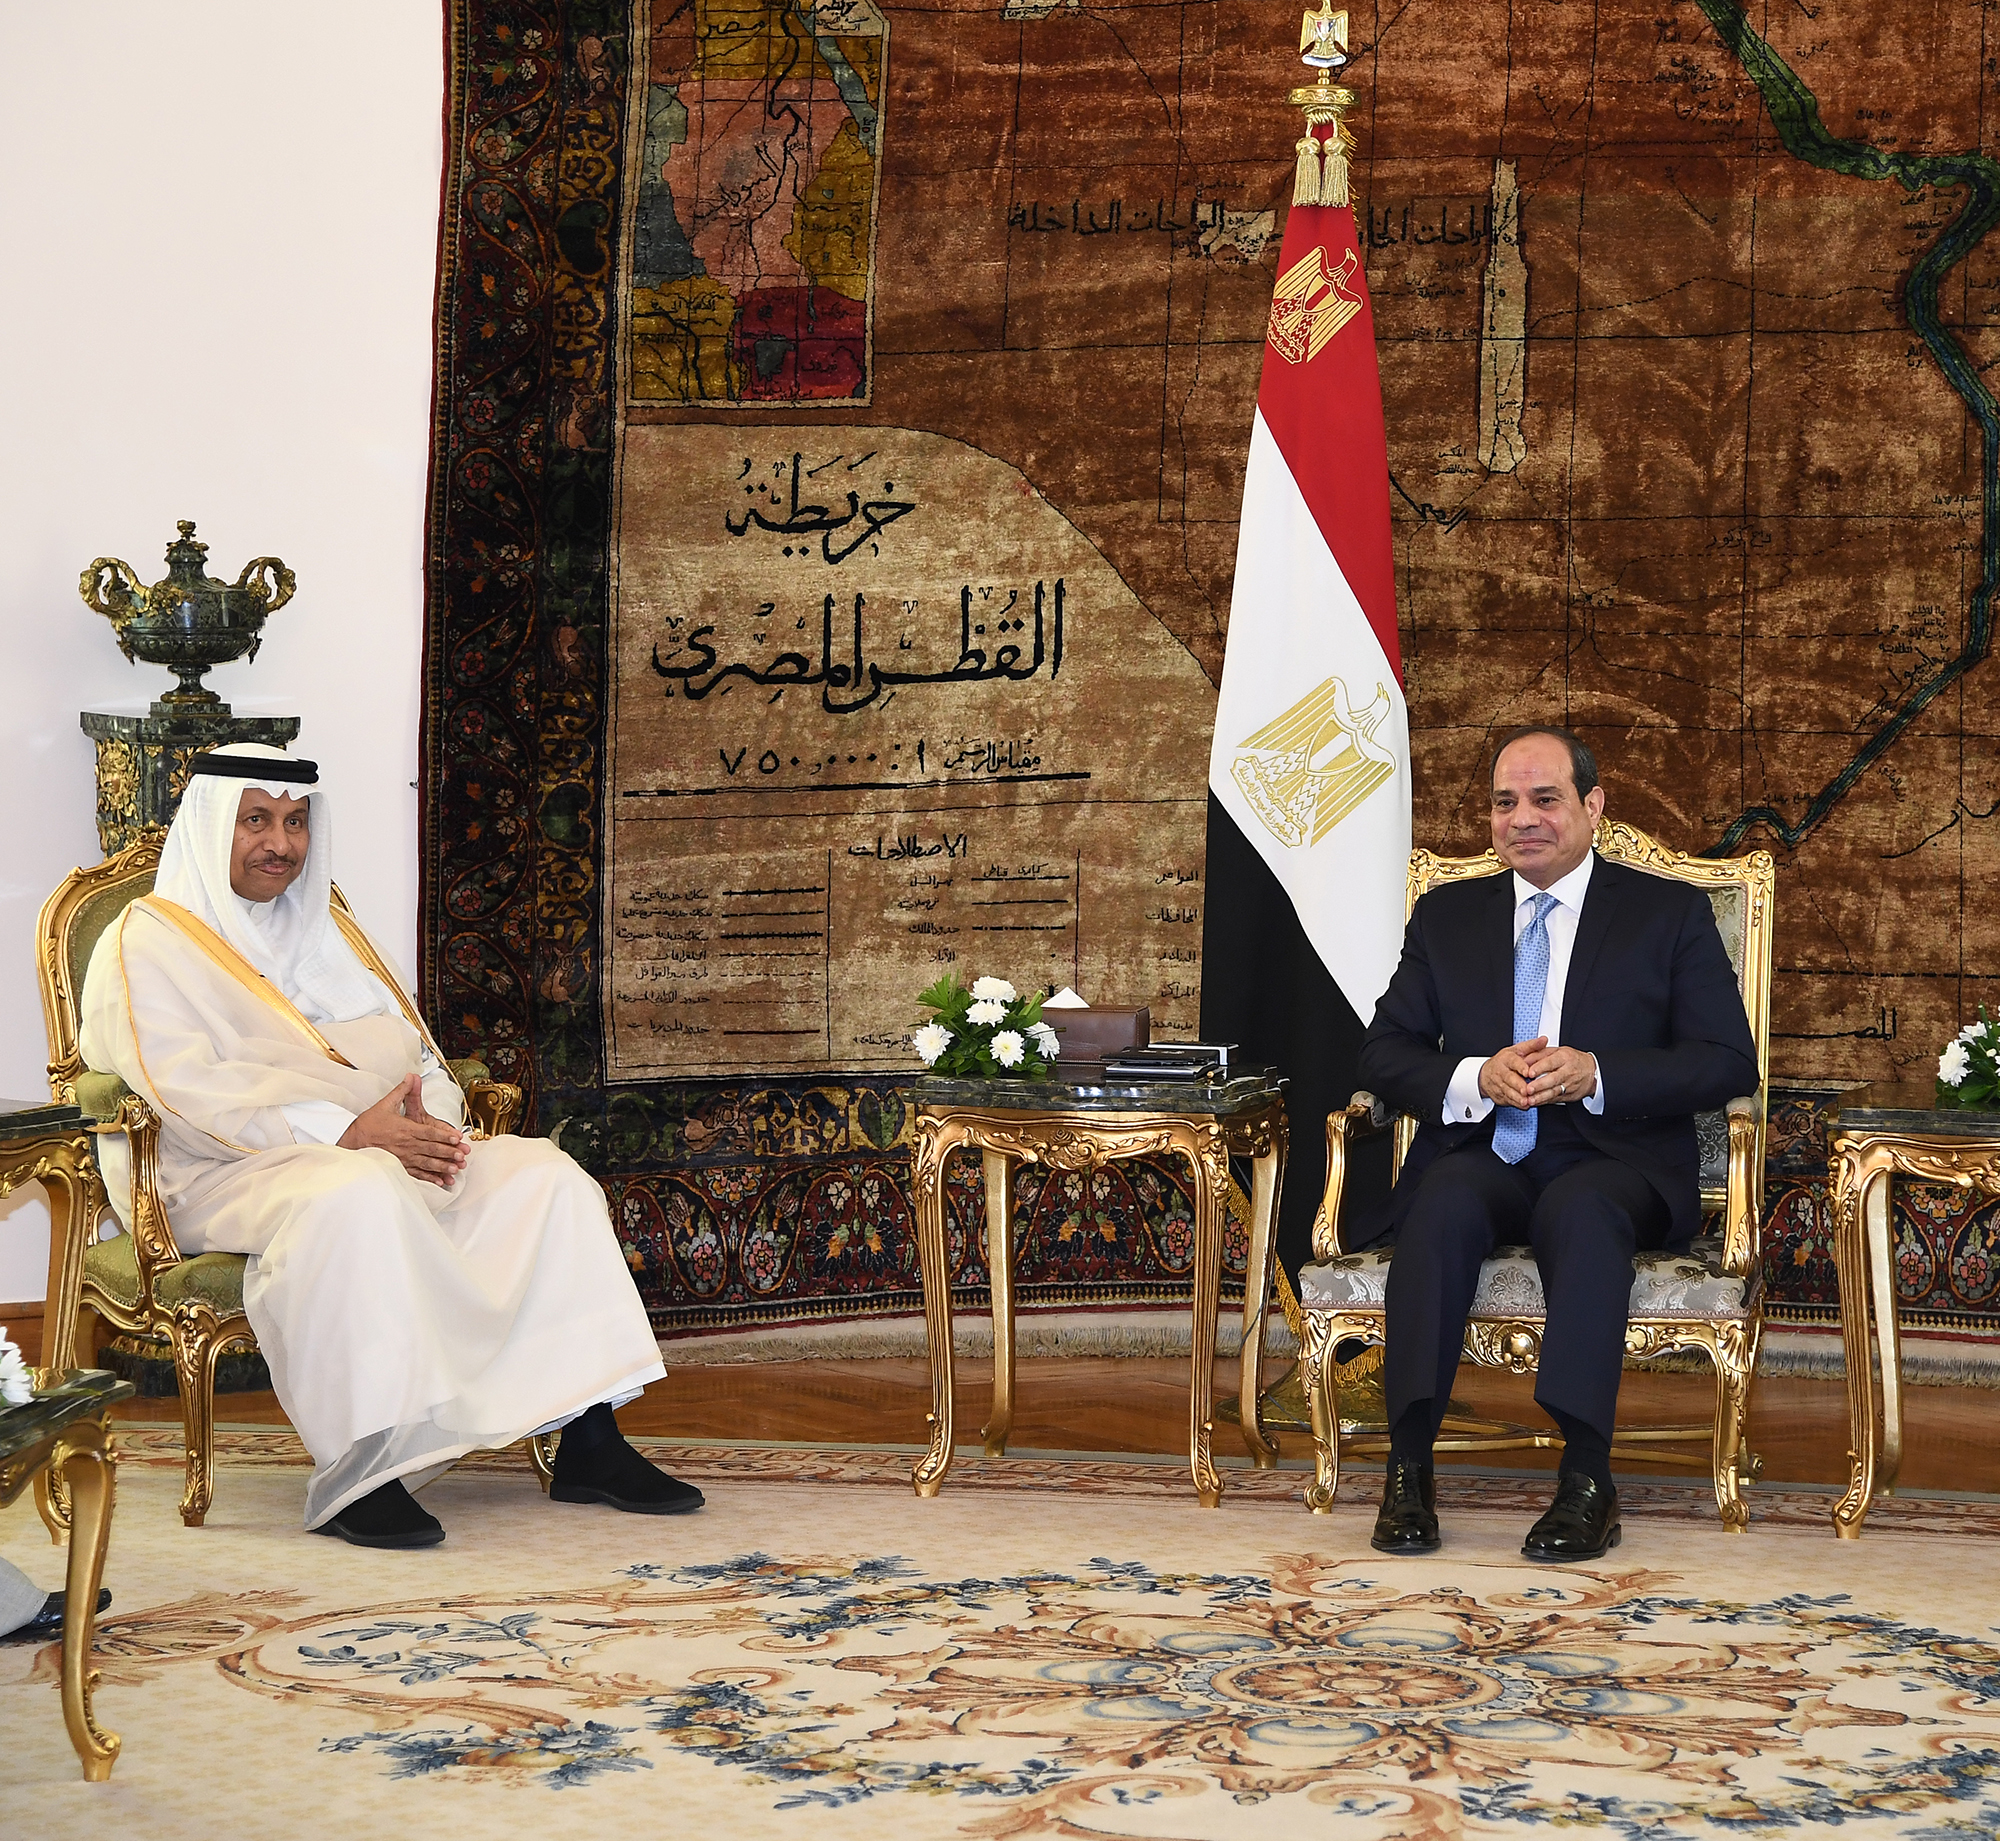 H.H the PM meeting the Egyptian President